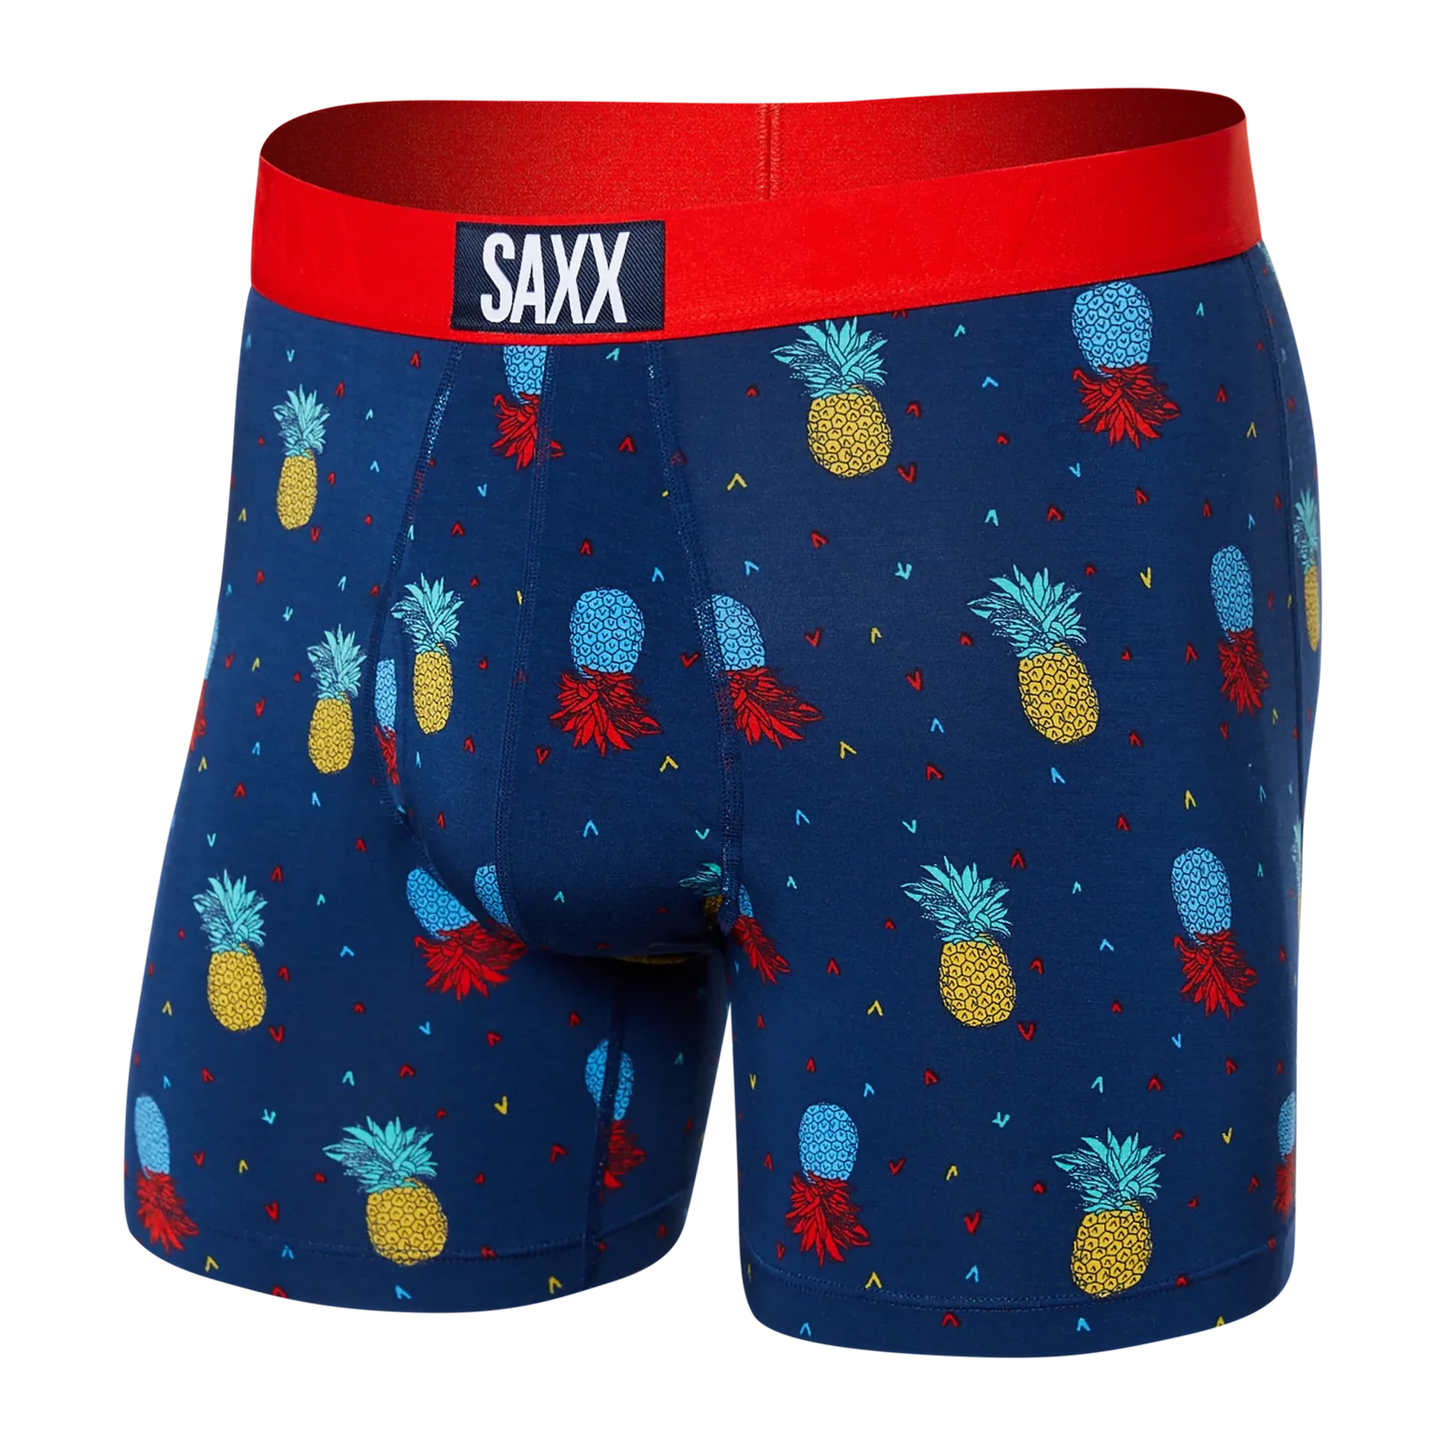 Ultra Boxer Brief (With Fly Opening) Underwear Saxx PFN S 